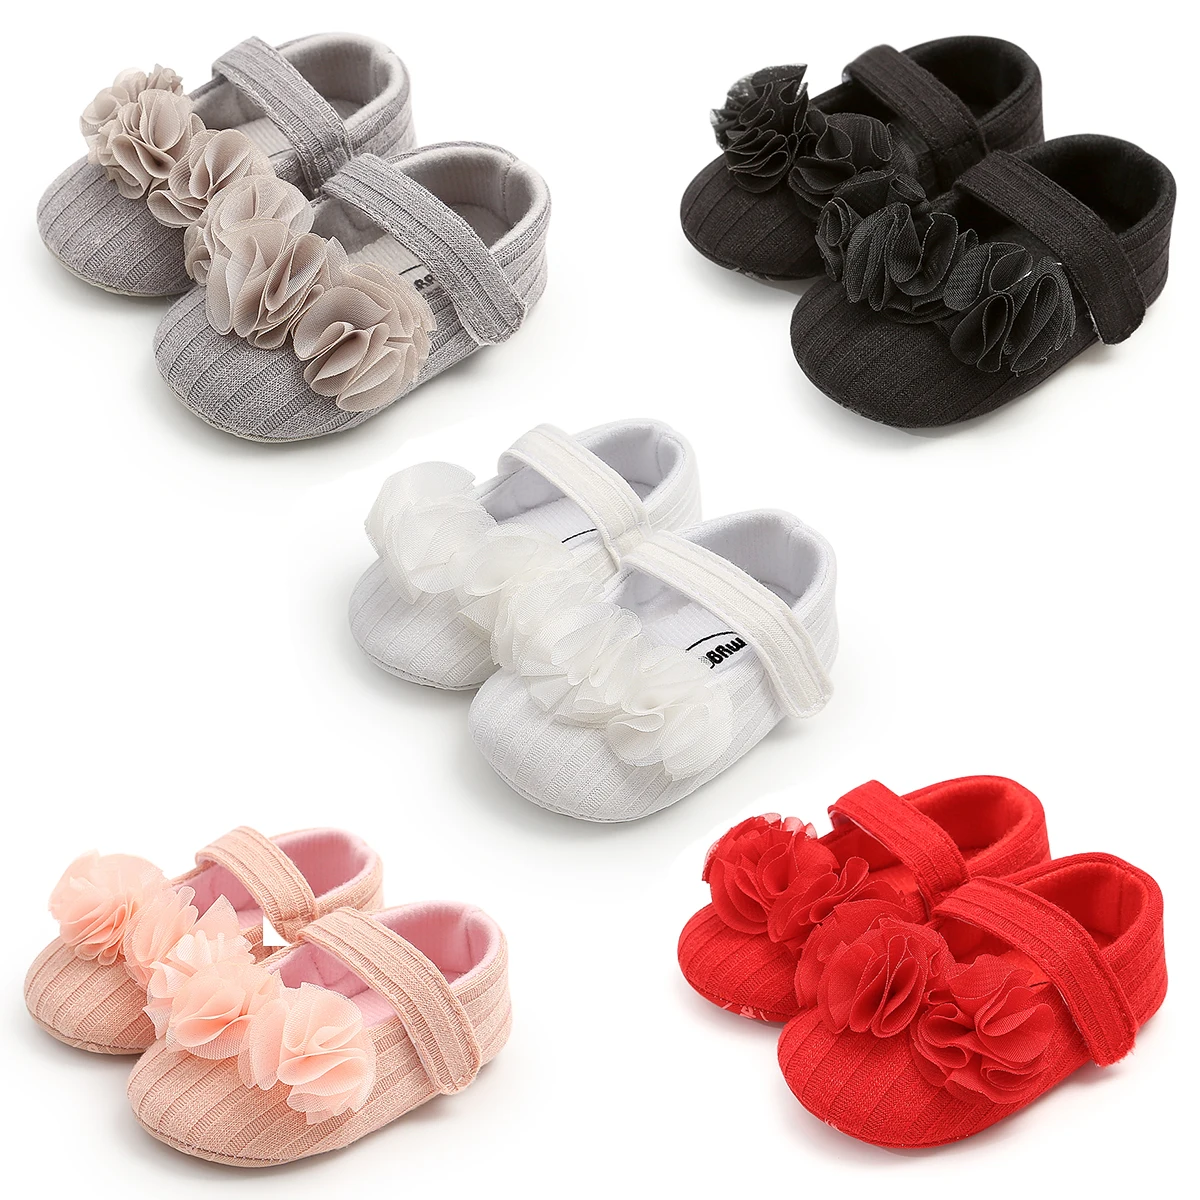 

Hot selling Cotton yarn Flower ball Party ballet toddler girl baby dress shoes, 5 colors